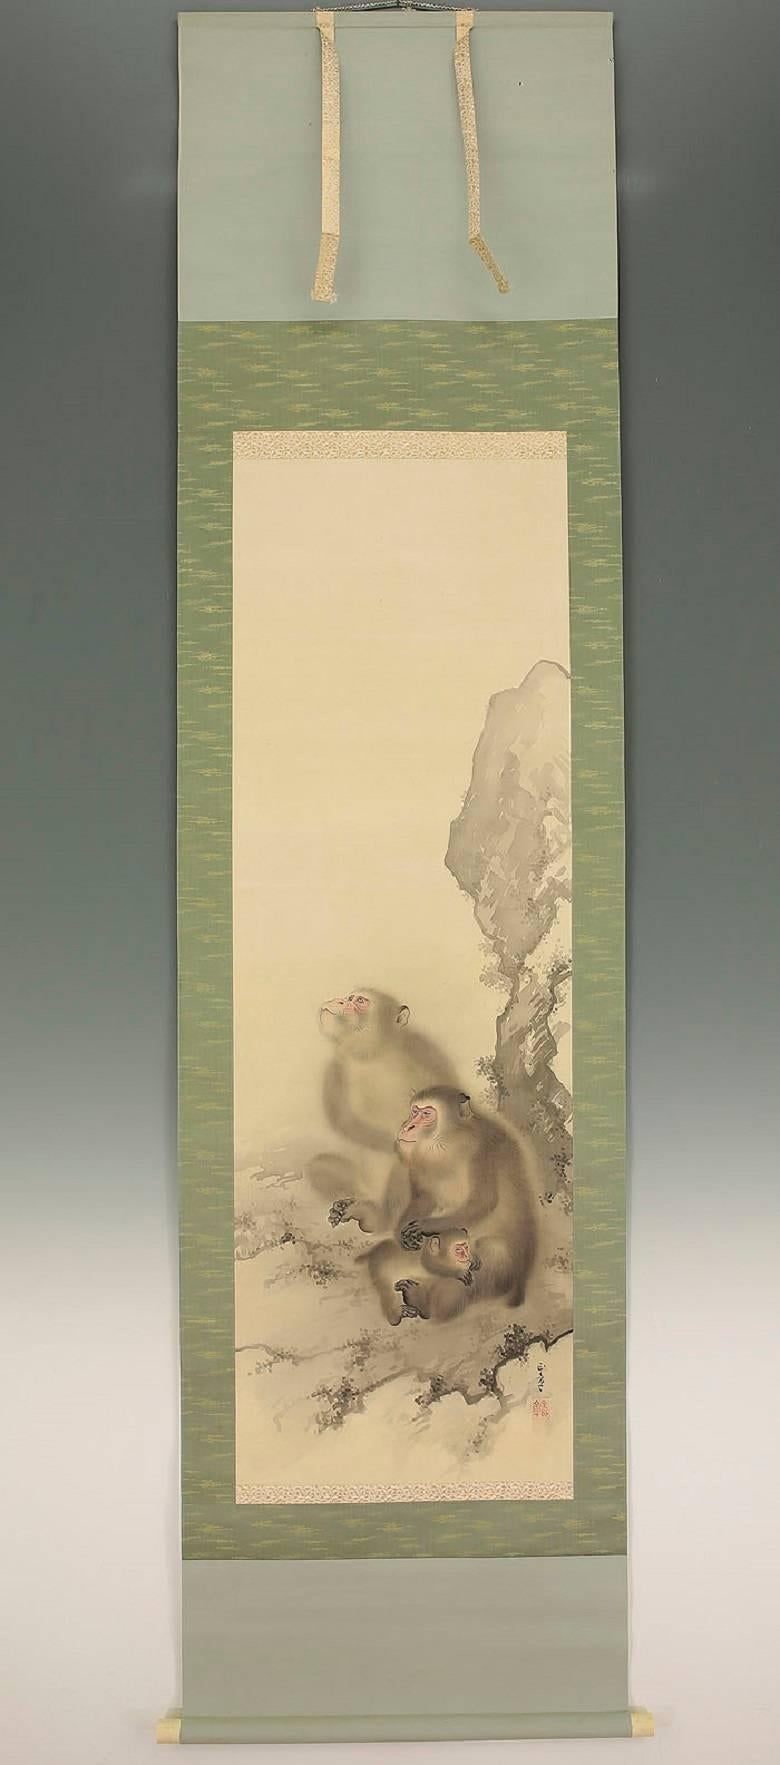 Japan, a charming family of three monkeys sit peacefully upon a branch in time of this auspicious hand-painted art composition on silk and dating to the middle Showa era mid-20th century.

Dimensions: 24 inches wide and 84.5 inches length.